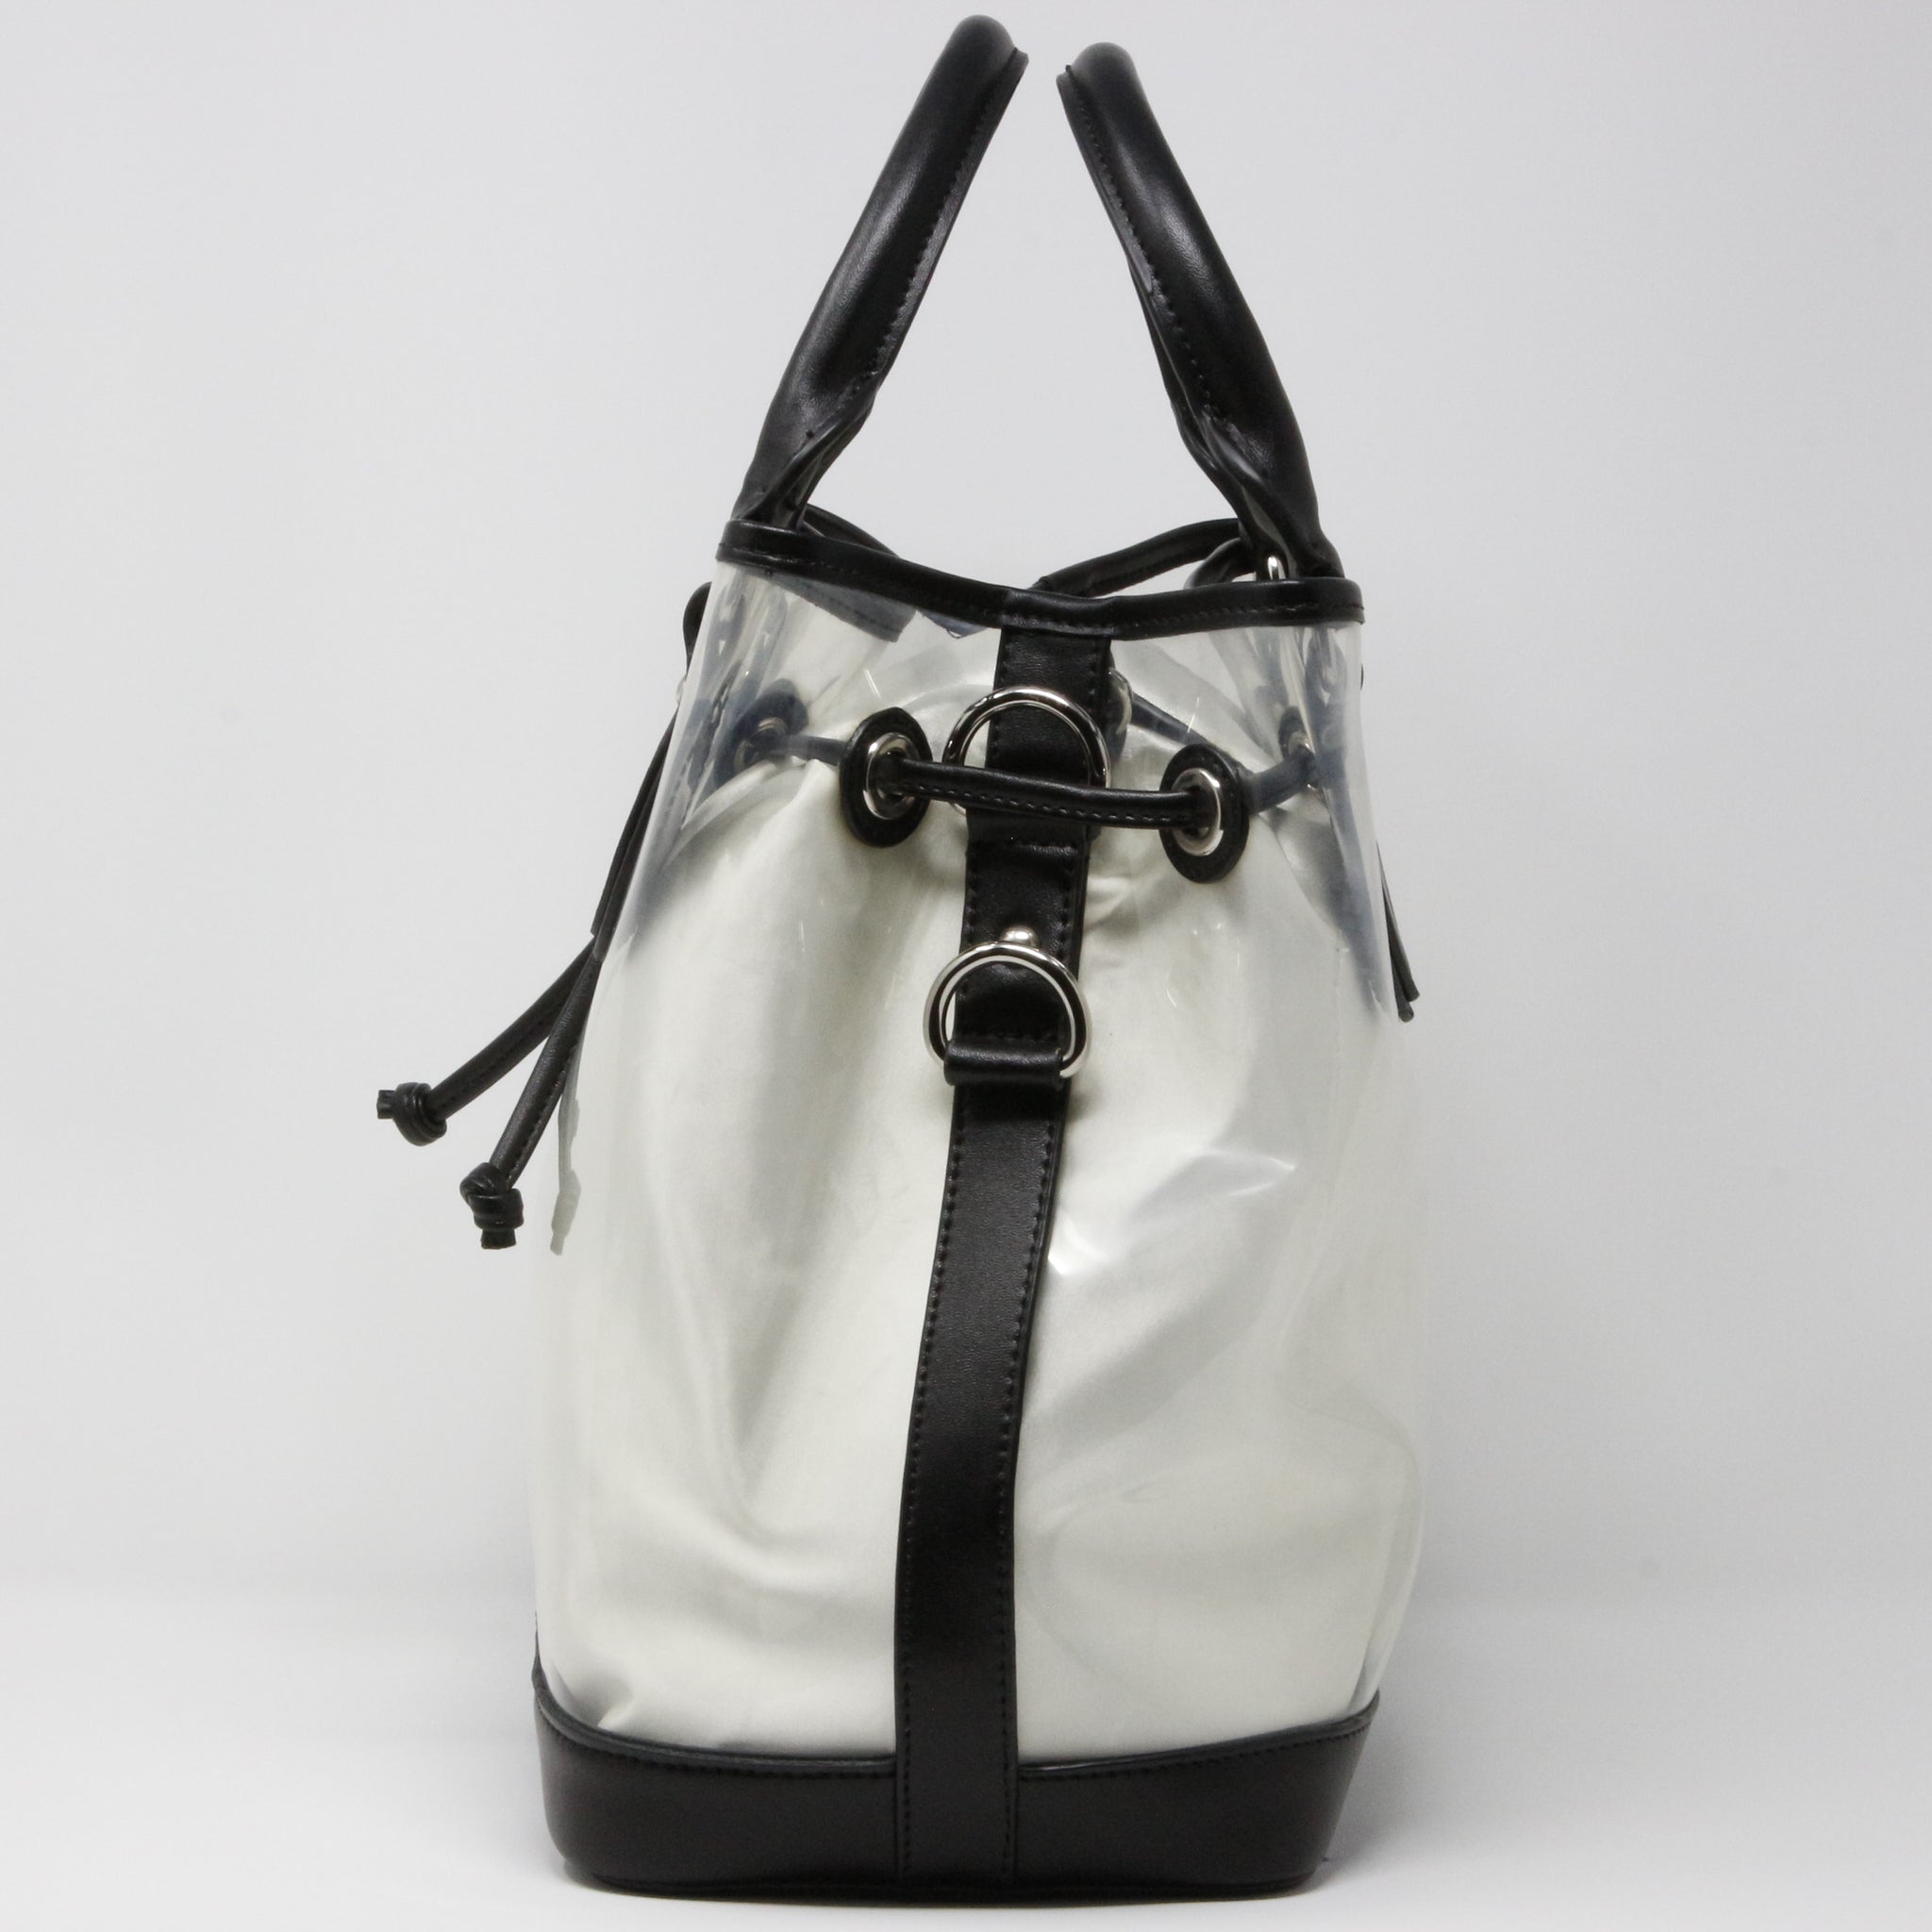 D Tote - Black Leather Clear Base